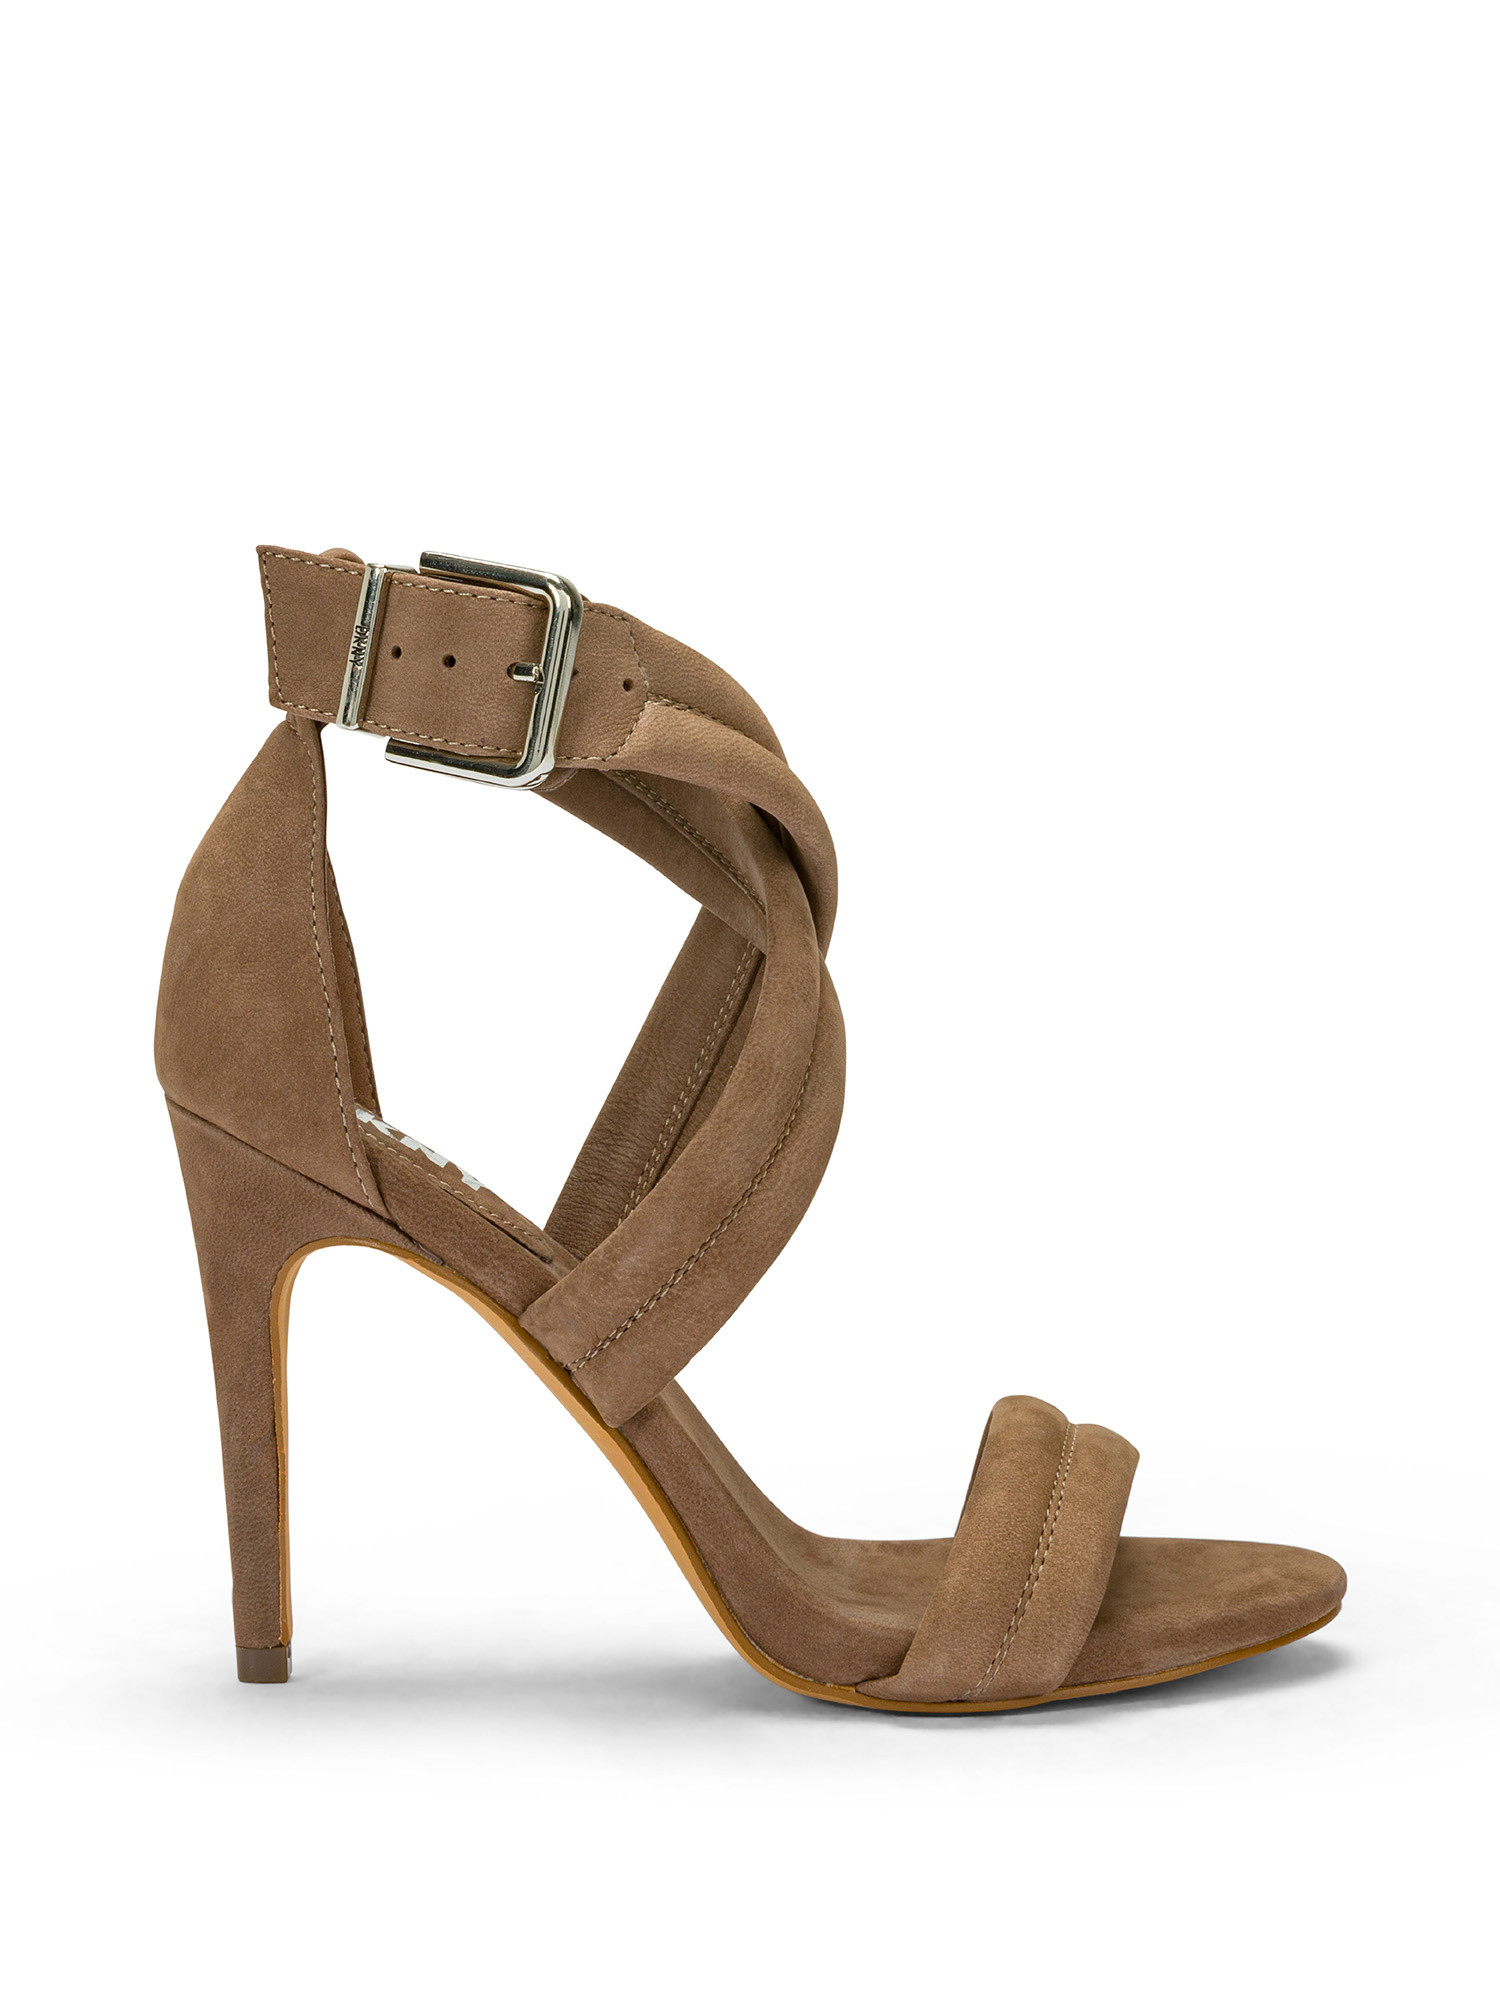 Dkny - Candra sandals with heel, Brown, large image number 0